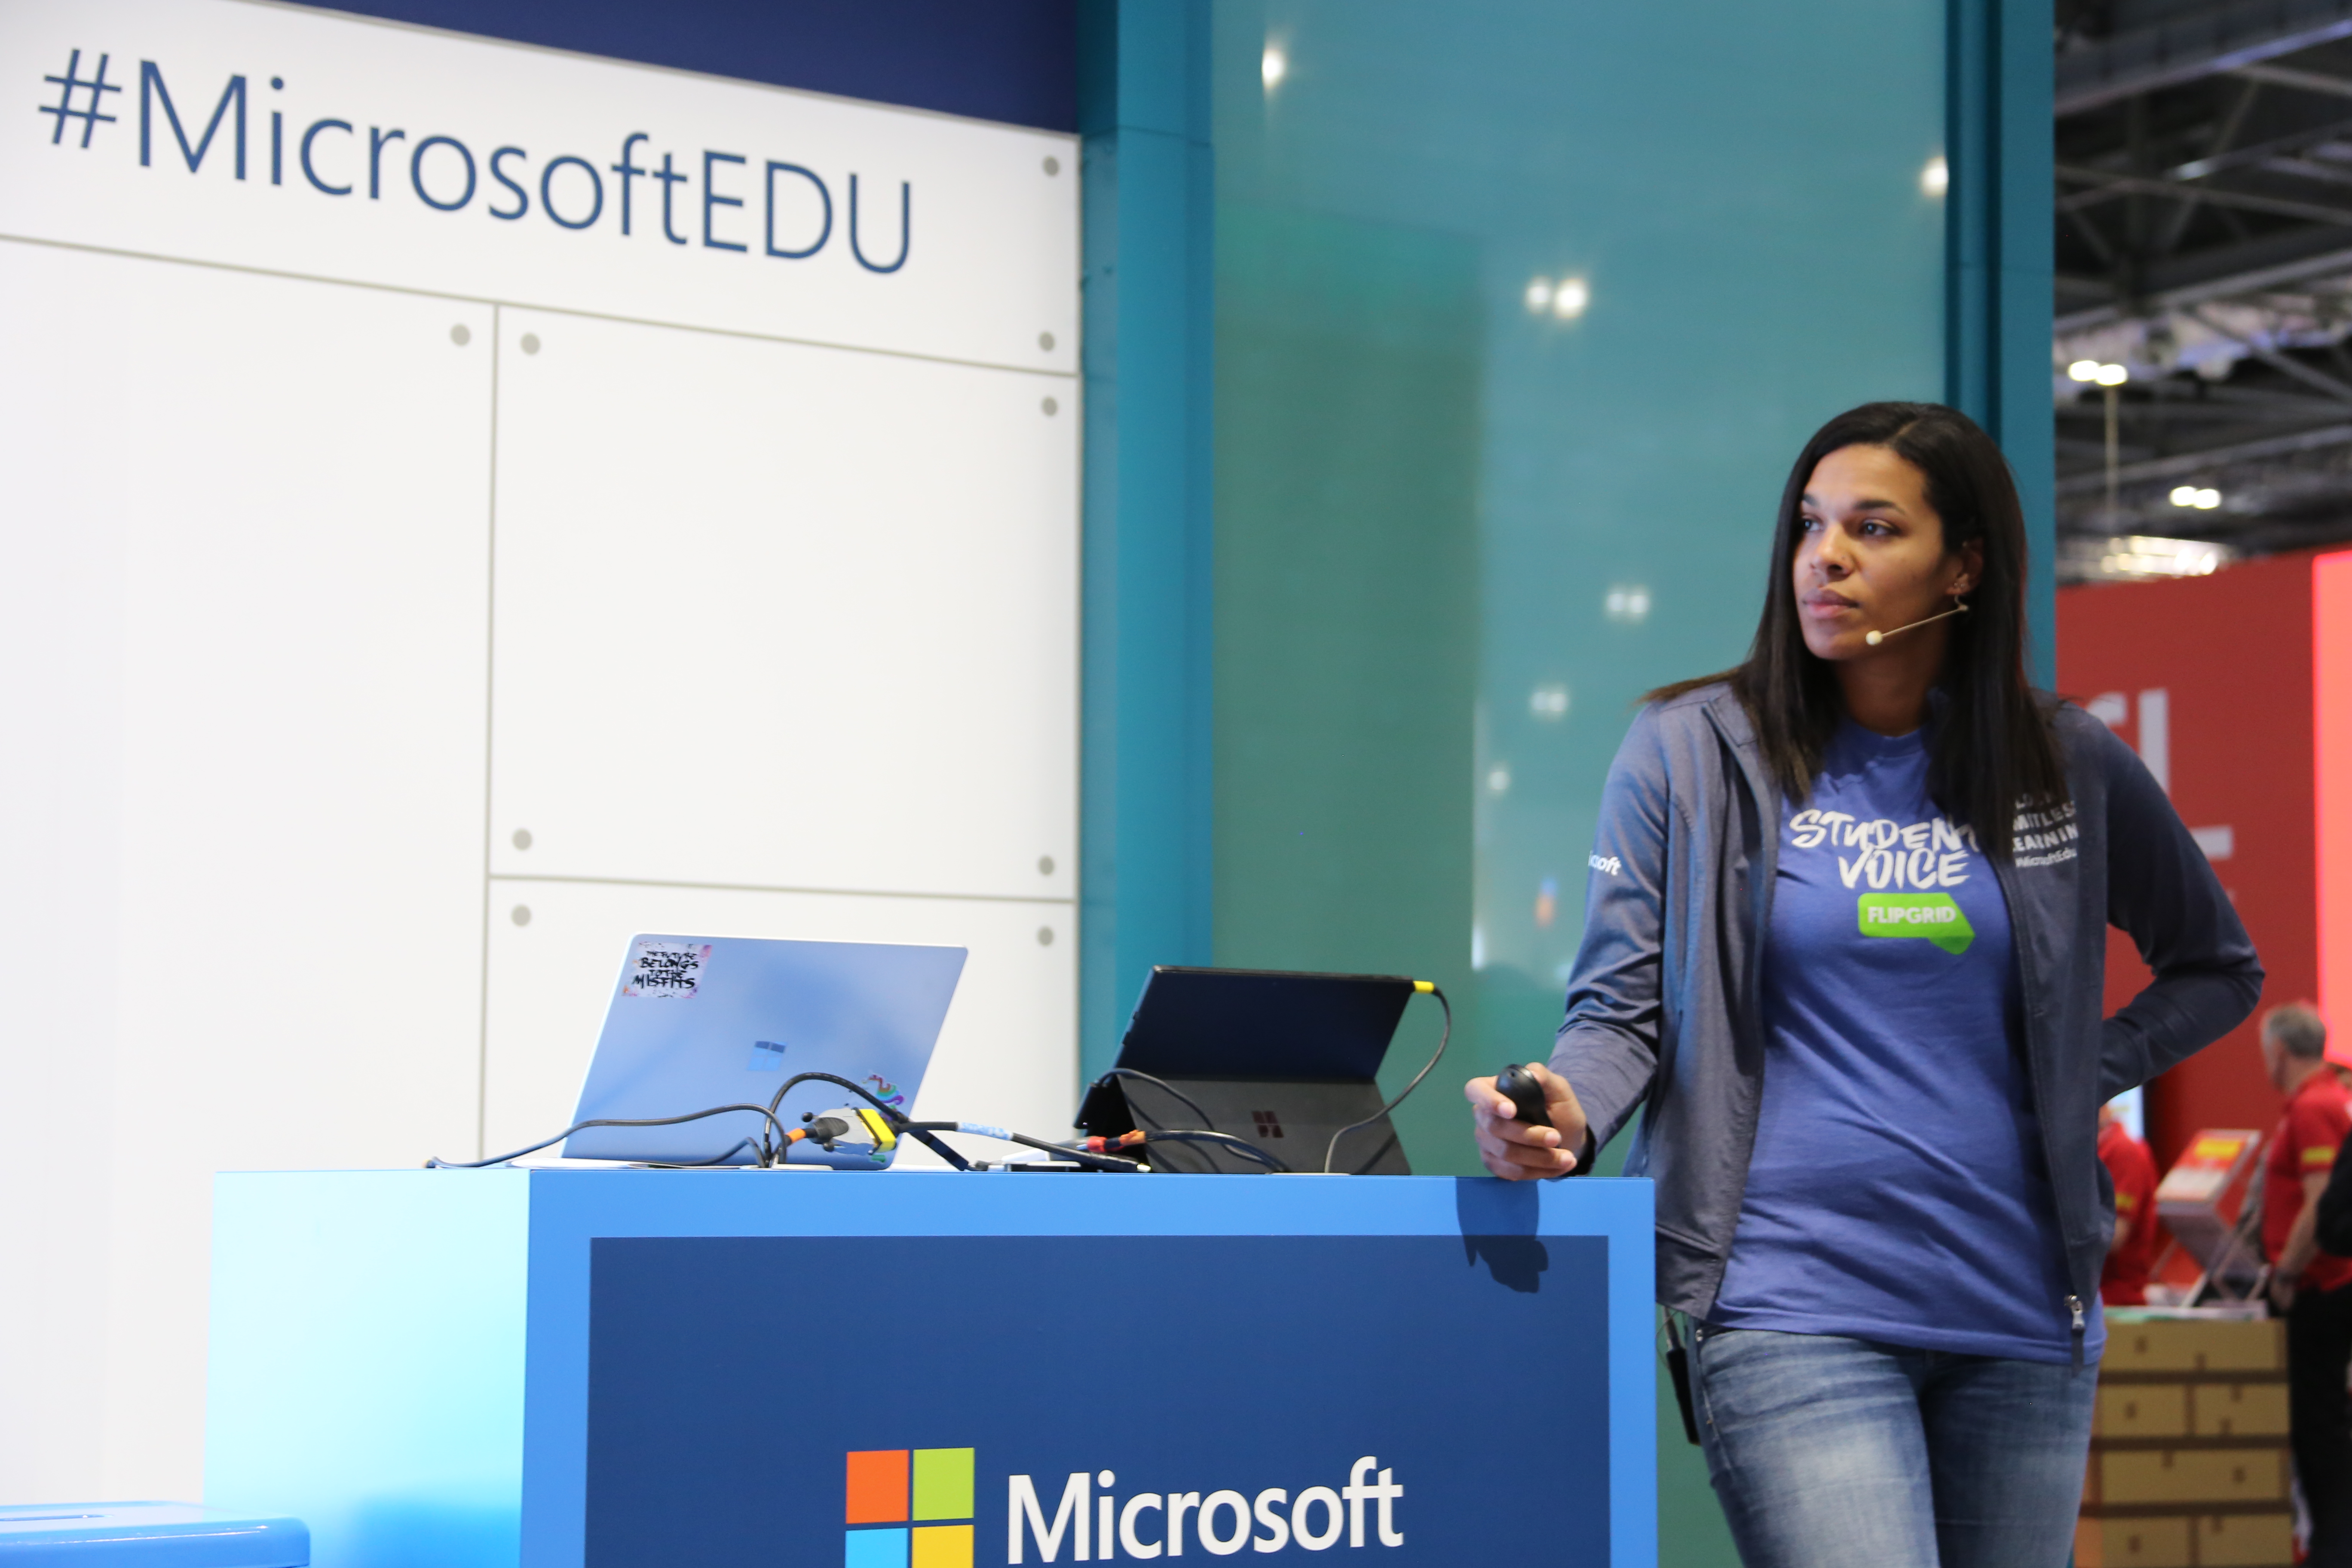 A woman gives a talk in Microsoft's area